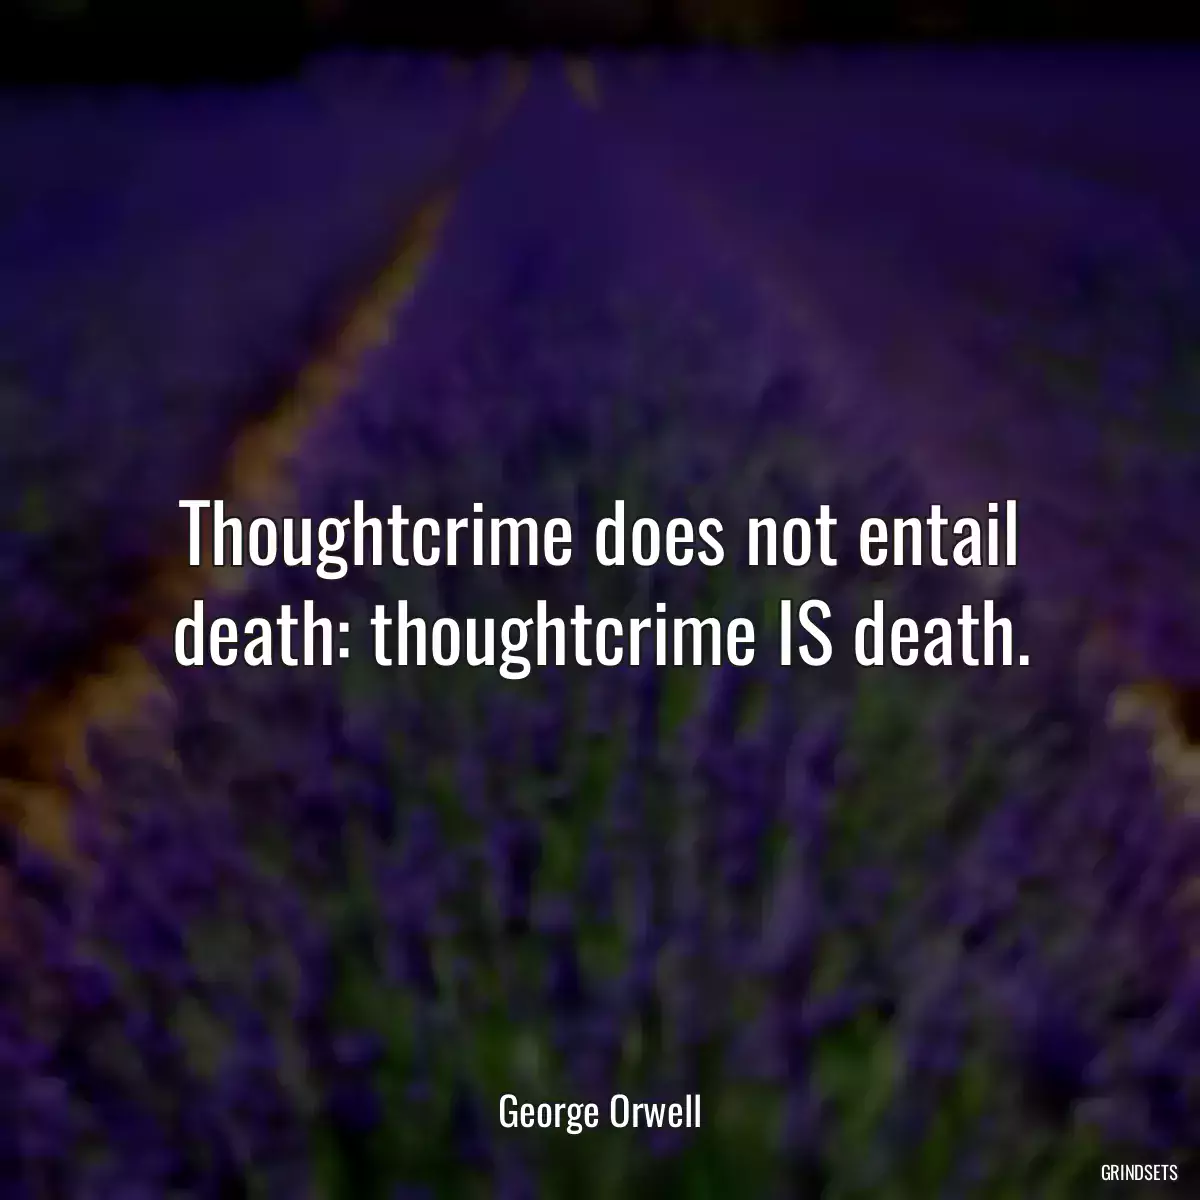 Thoughtcrime does not entail death: thoughtcrime IS death.